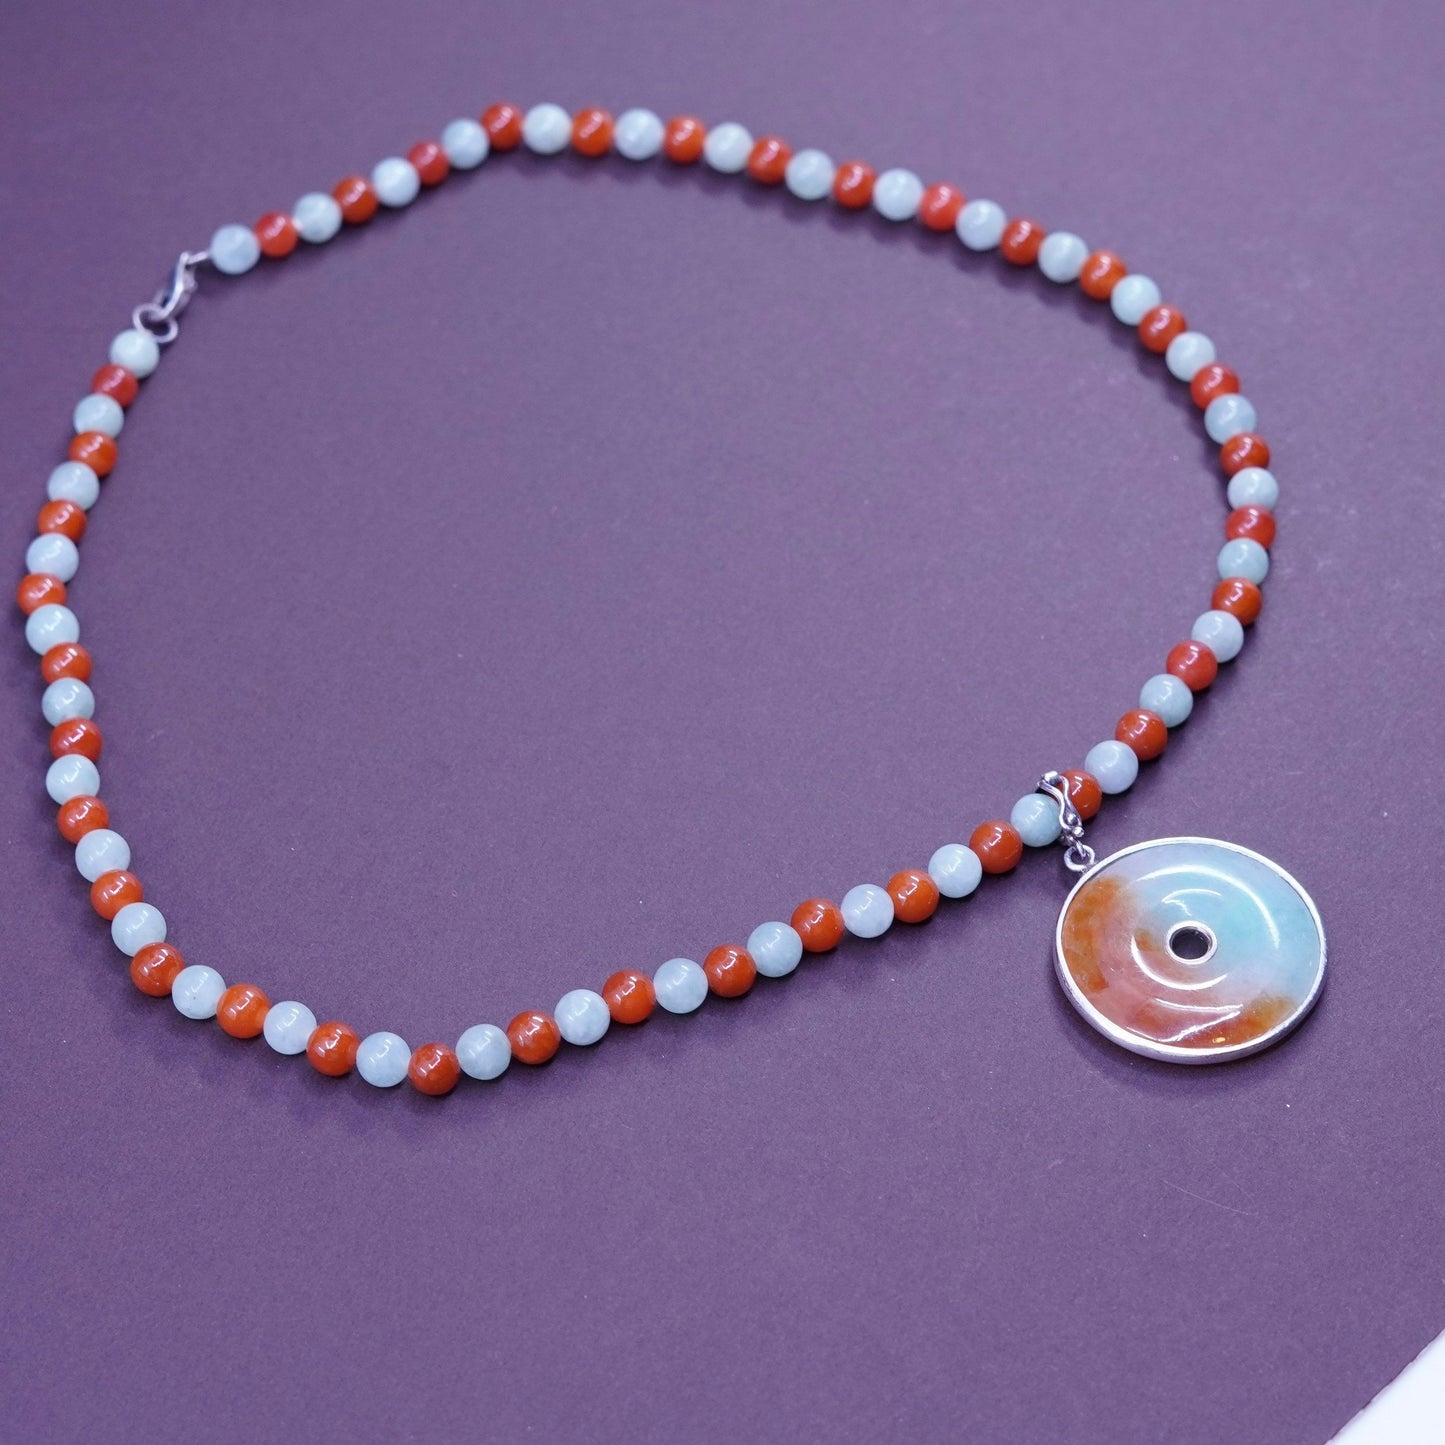 18”, jade carnelian beads necklace with Sterling 925 silver chain coin pendant